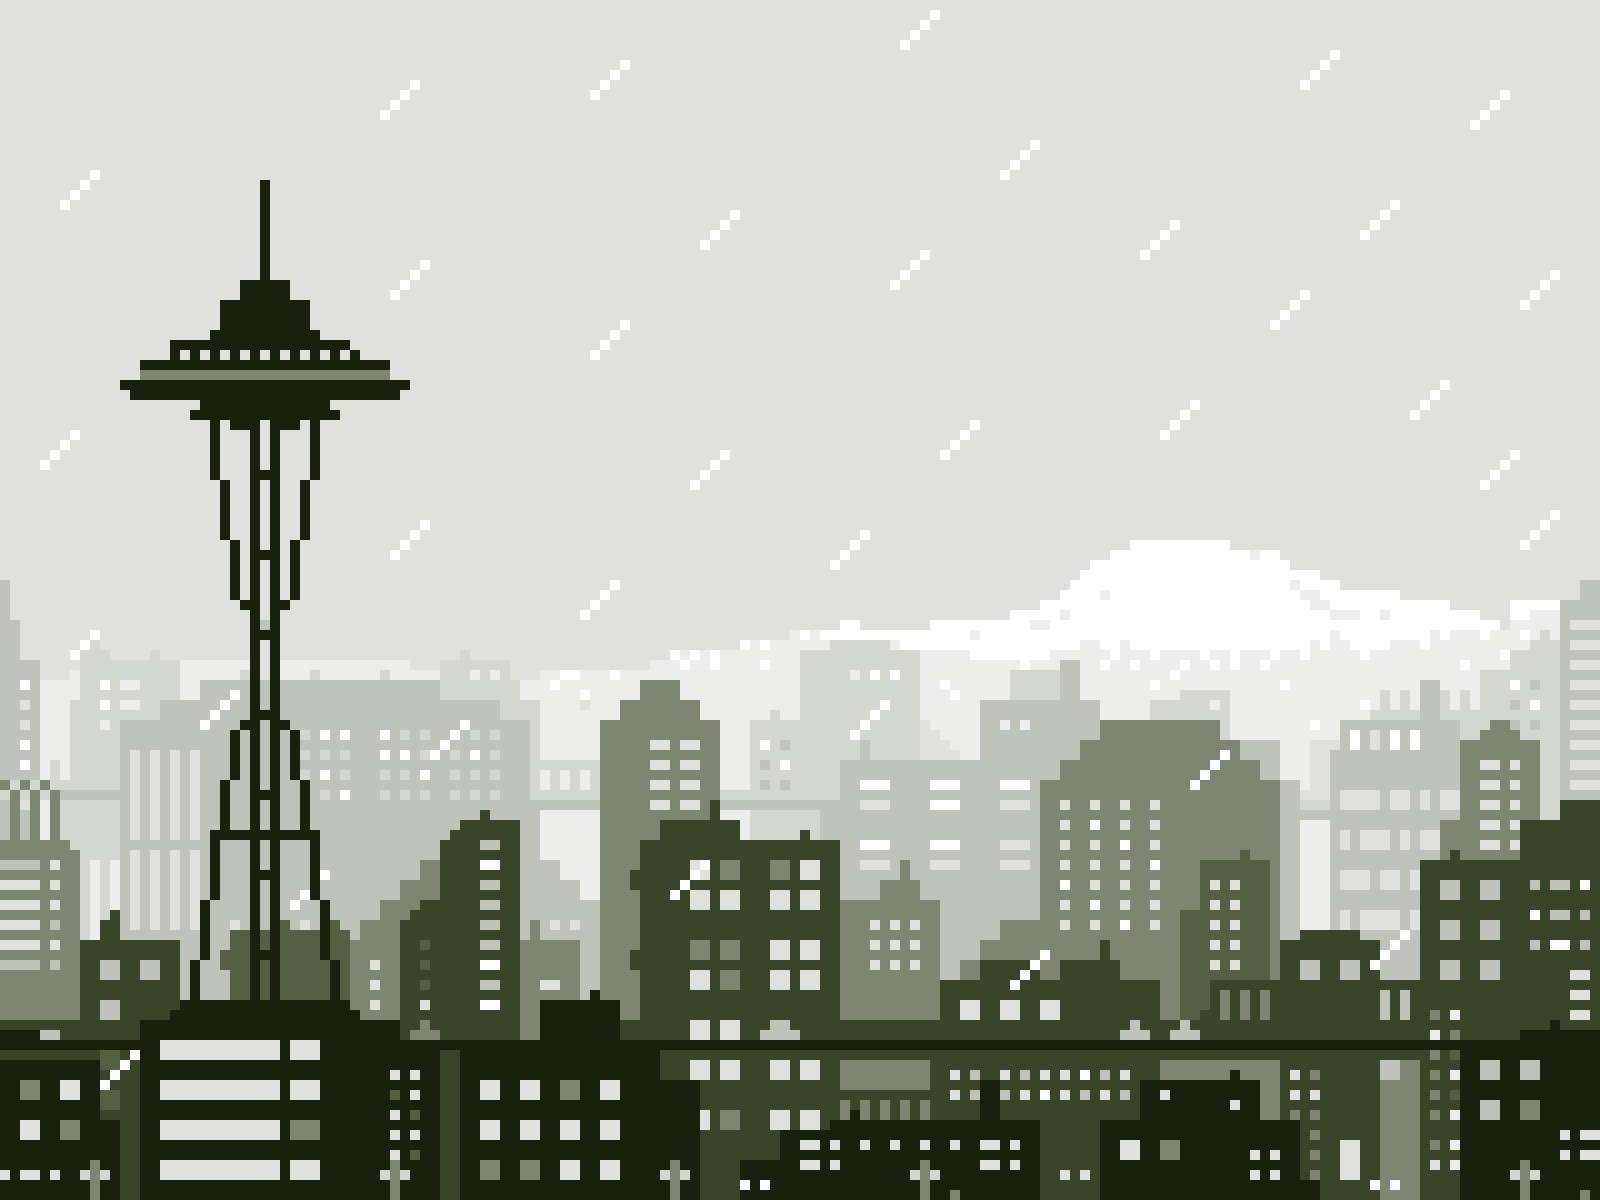 City Pixel Art Designs Themes Templates And Downloadable Graphic Elements On Dribbble